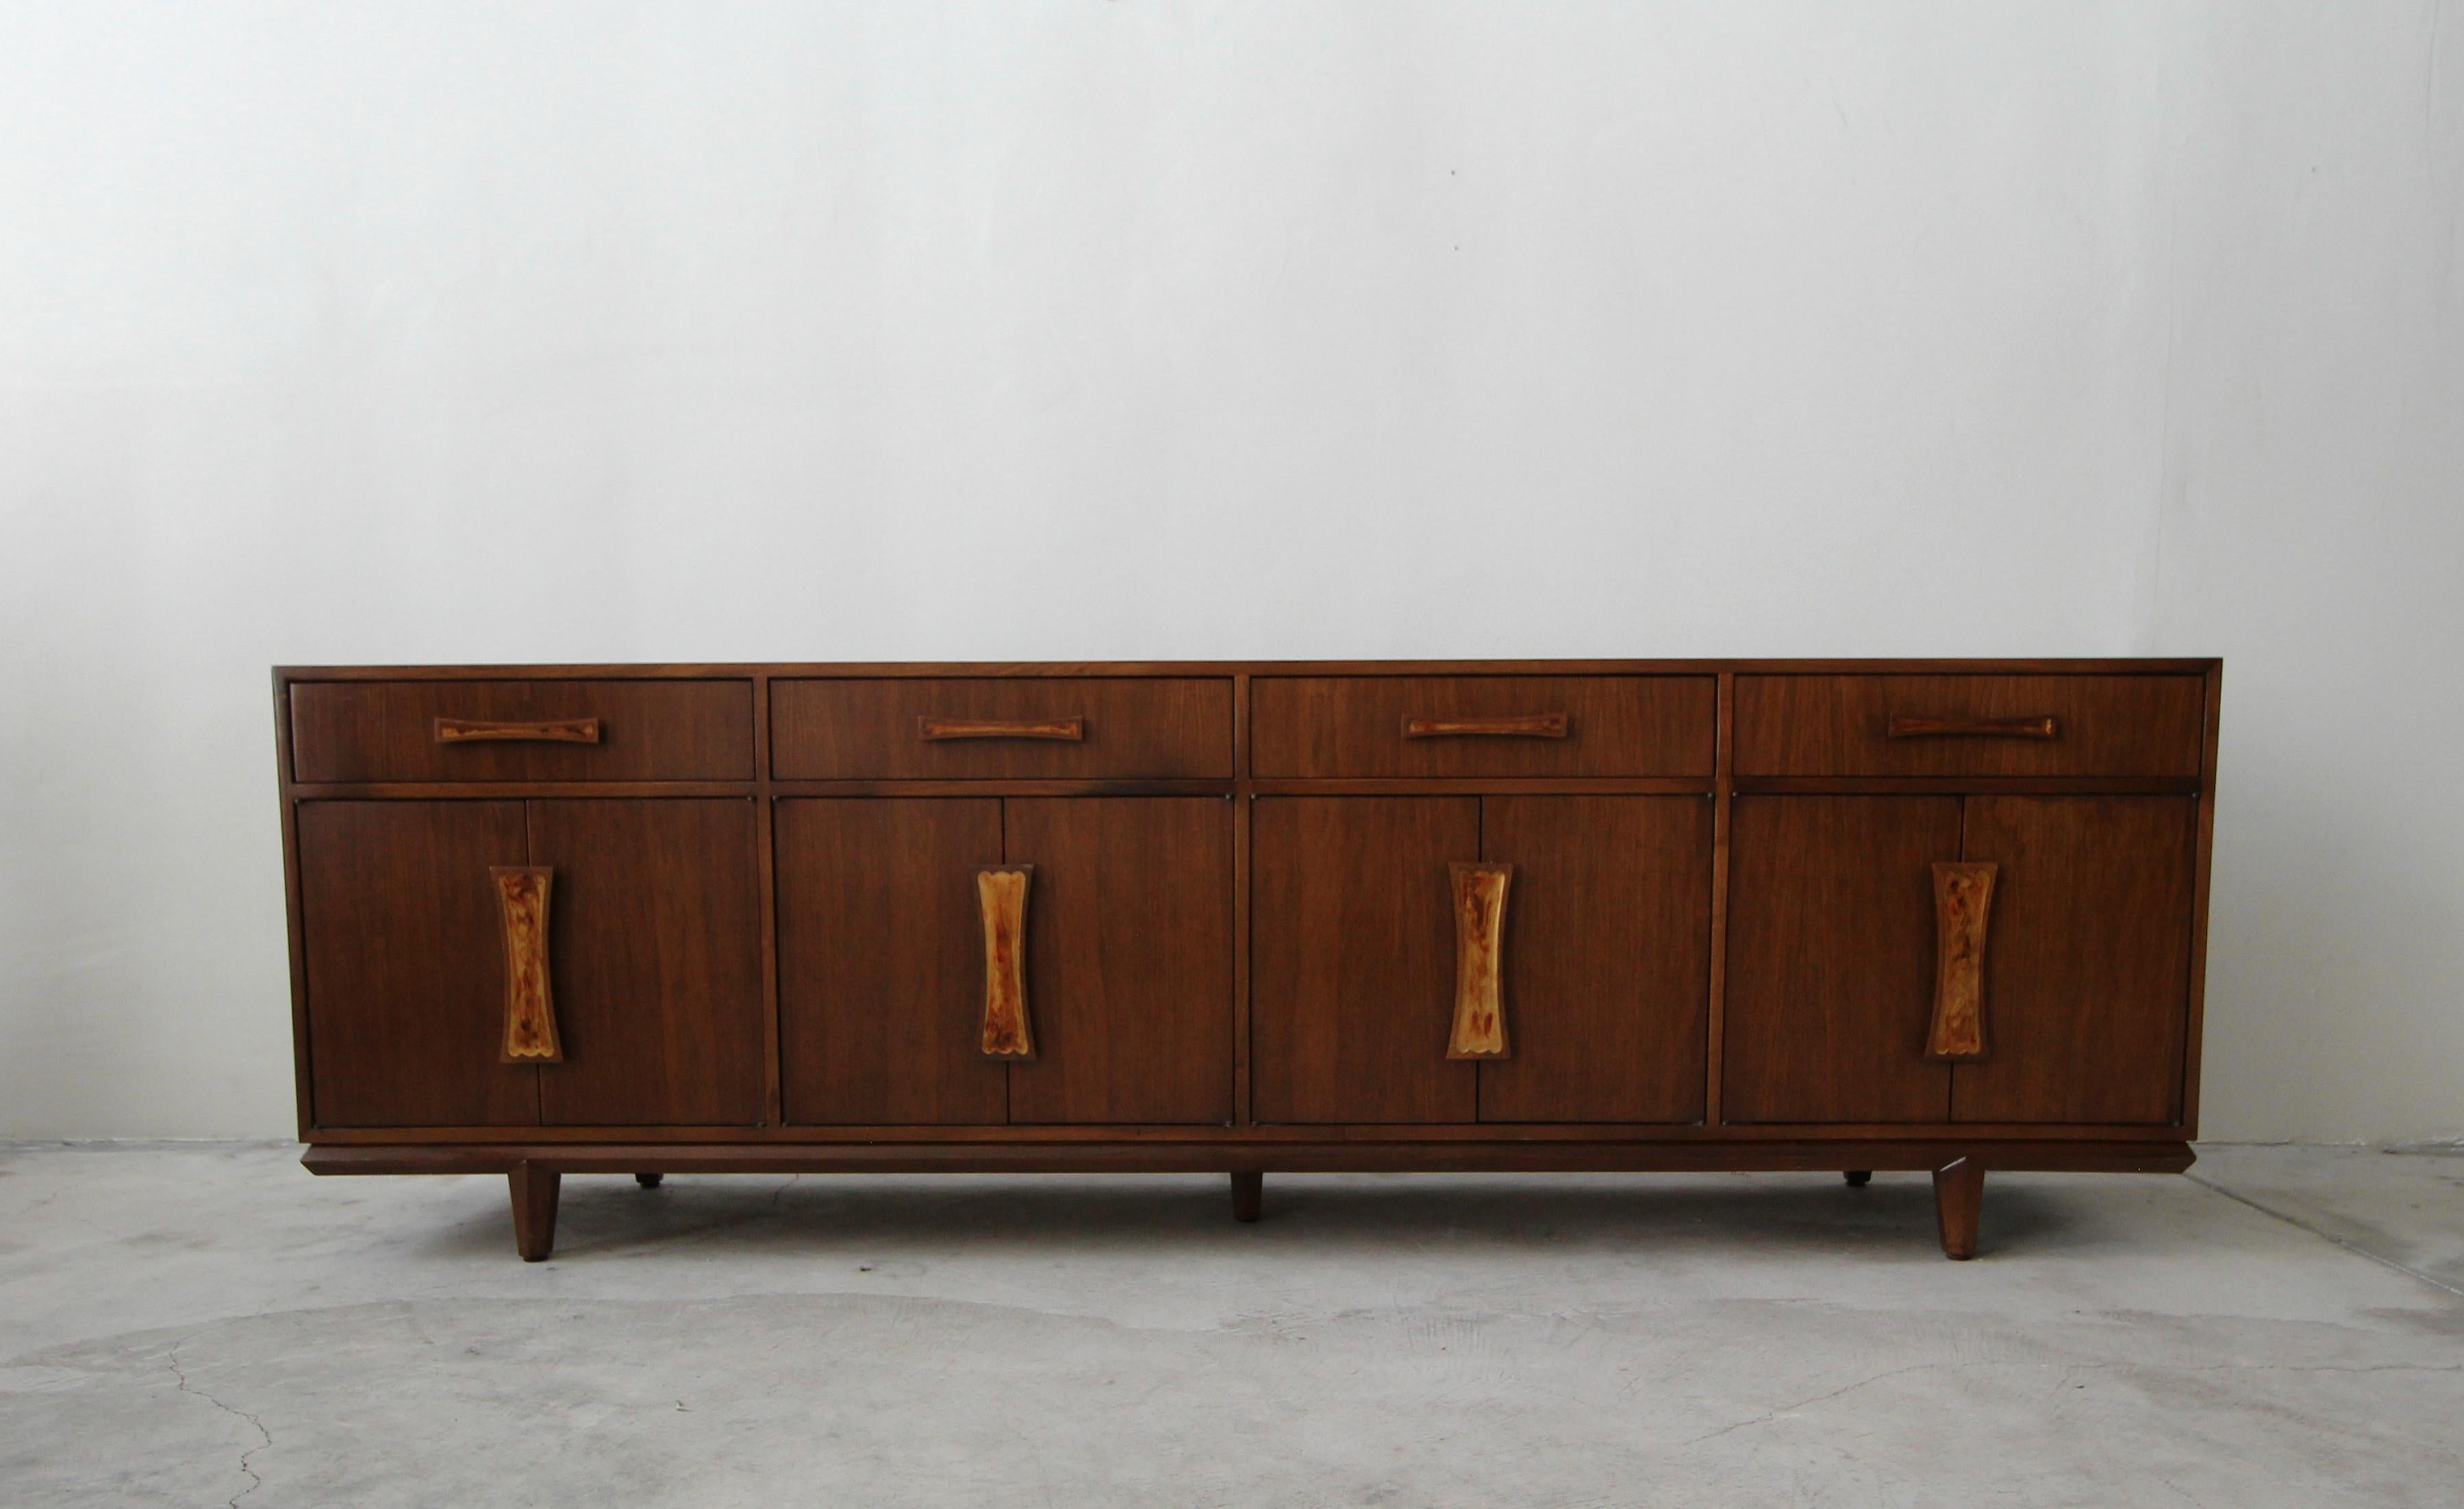 Exquisite midcentury walnut credenza by Cal Mode Furniture. If your looking for a large case piece with a simple and beautiful look, you've found it. The unique resin inlay handles and sculpted details, give this piece stunning character.

Cabinet